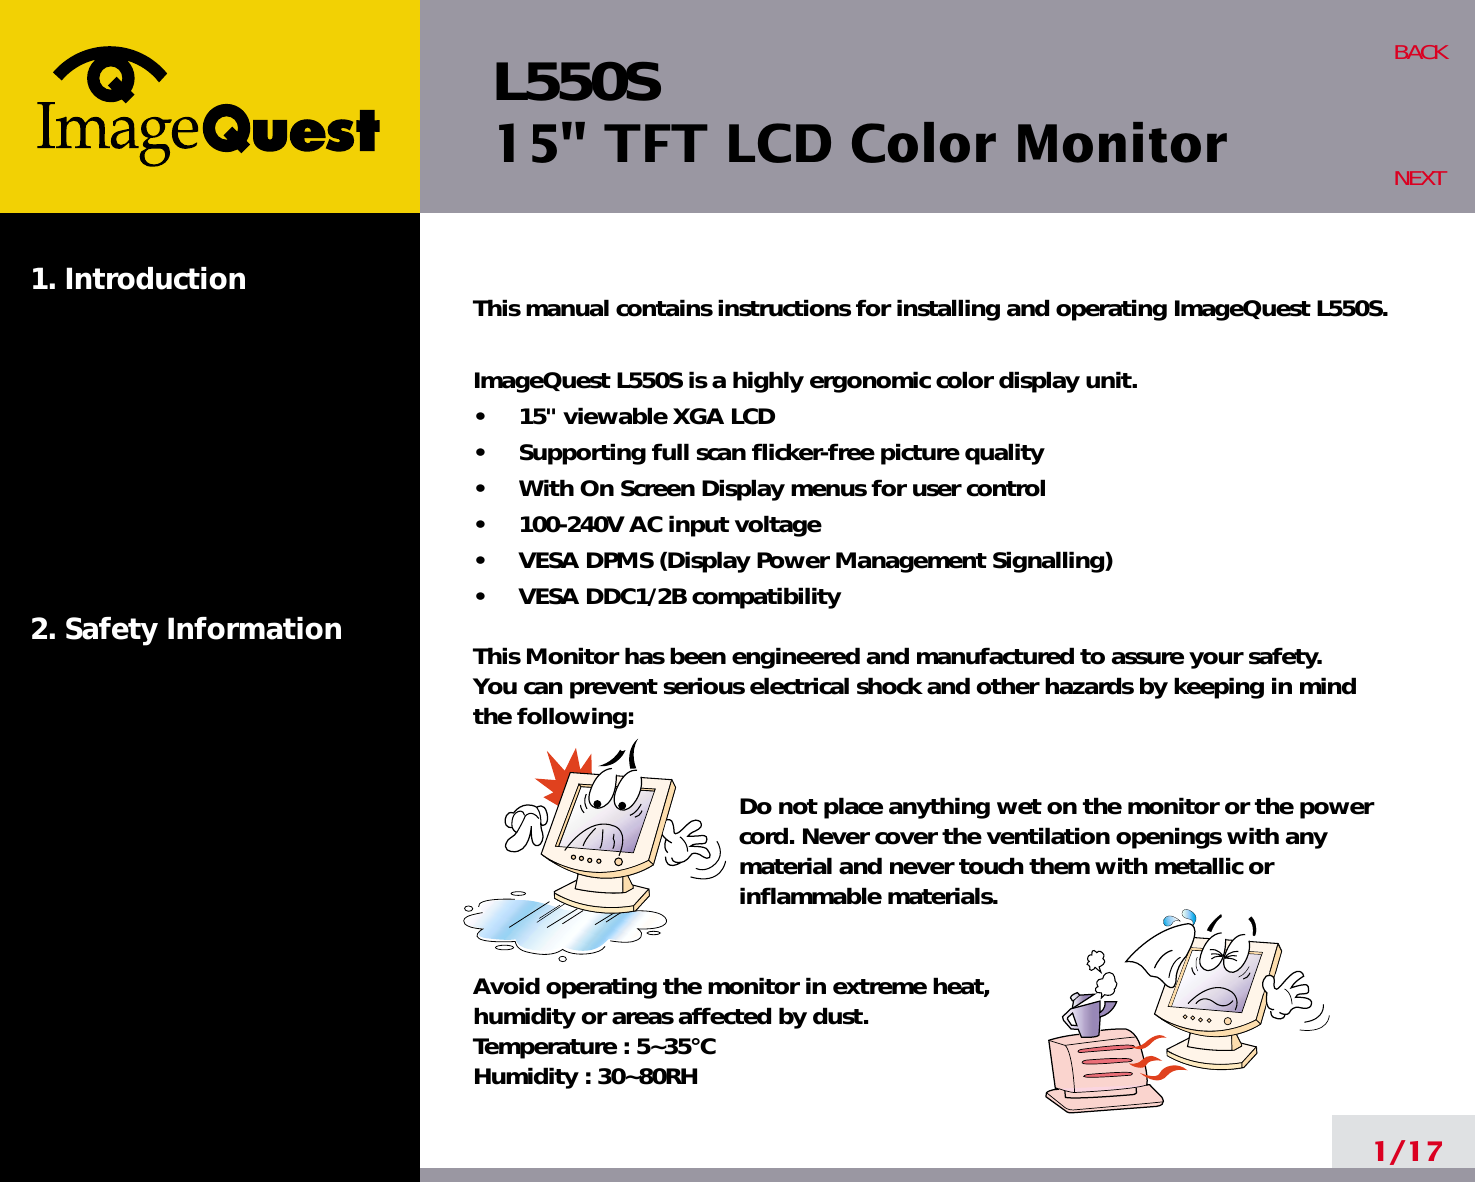 L550S15&quot; TFT LCD Color Monitor1. Introduction2. Safety Information1/17BACKNEXTThis manual contains instructions for installing and operating ImageQuest L550S.    ImageQuest L550S is a highly ergonomic color display unit.•     15&quot; viewable XGA LCD•     Supporting full scan flicker-free picture quality•     With On Screen Display menus for user control•     100-240V AC input voltage•     VESA DPMS (Display Power Management Signalling)•     VESA DDC1/2B compatibilityThis Monitor has been engineered and manufactured to assure your safety. You can prevent serious electrical shock and other hazards by keeping in mind the following:Do not place anything wet on the monitor or the powercord. Never cover the ventilation openings with anymaterial and never touch them with metallic or inflammable materials.Avoid operating the monitor in extreme heat, humidity or areas affected by dust. Temperature : 5~35°CHumidity : 30~80RH 